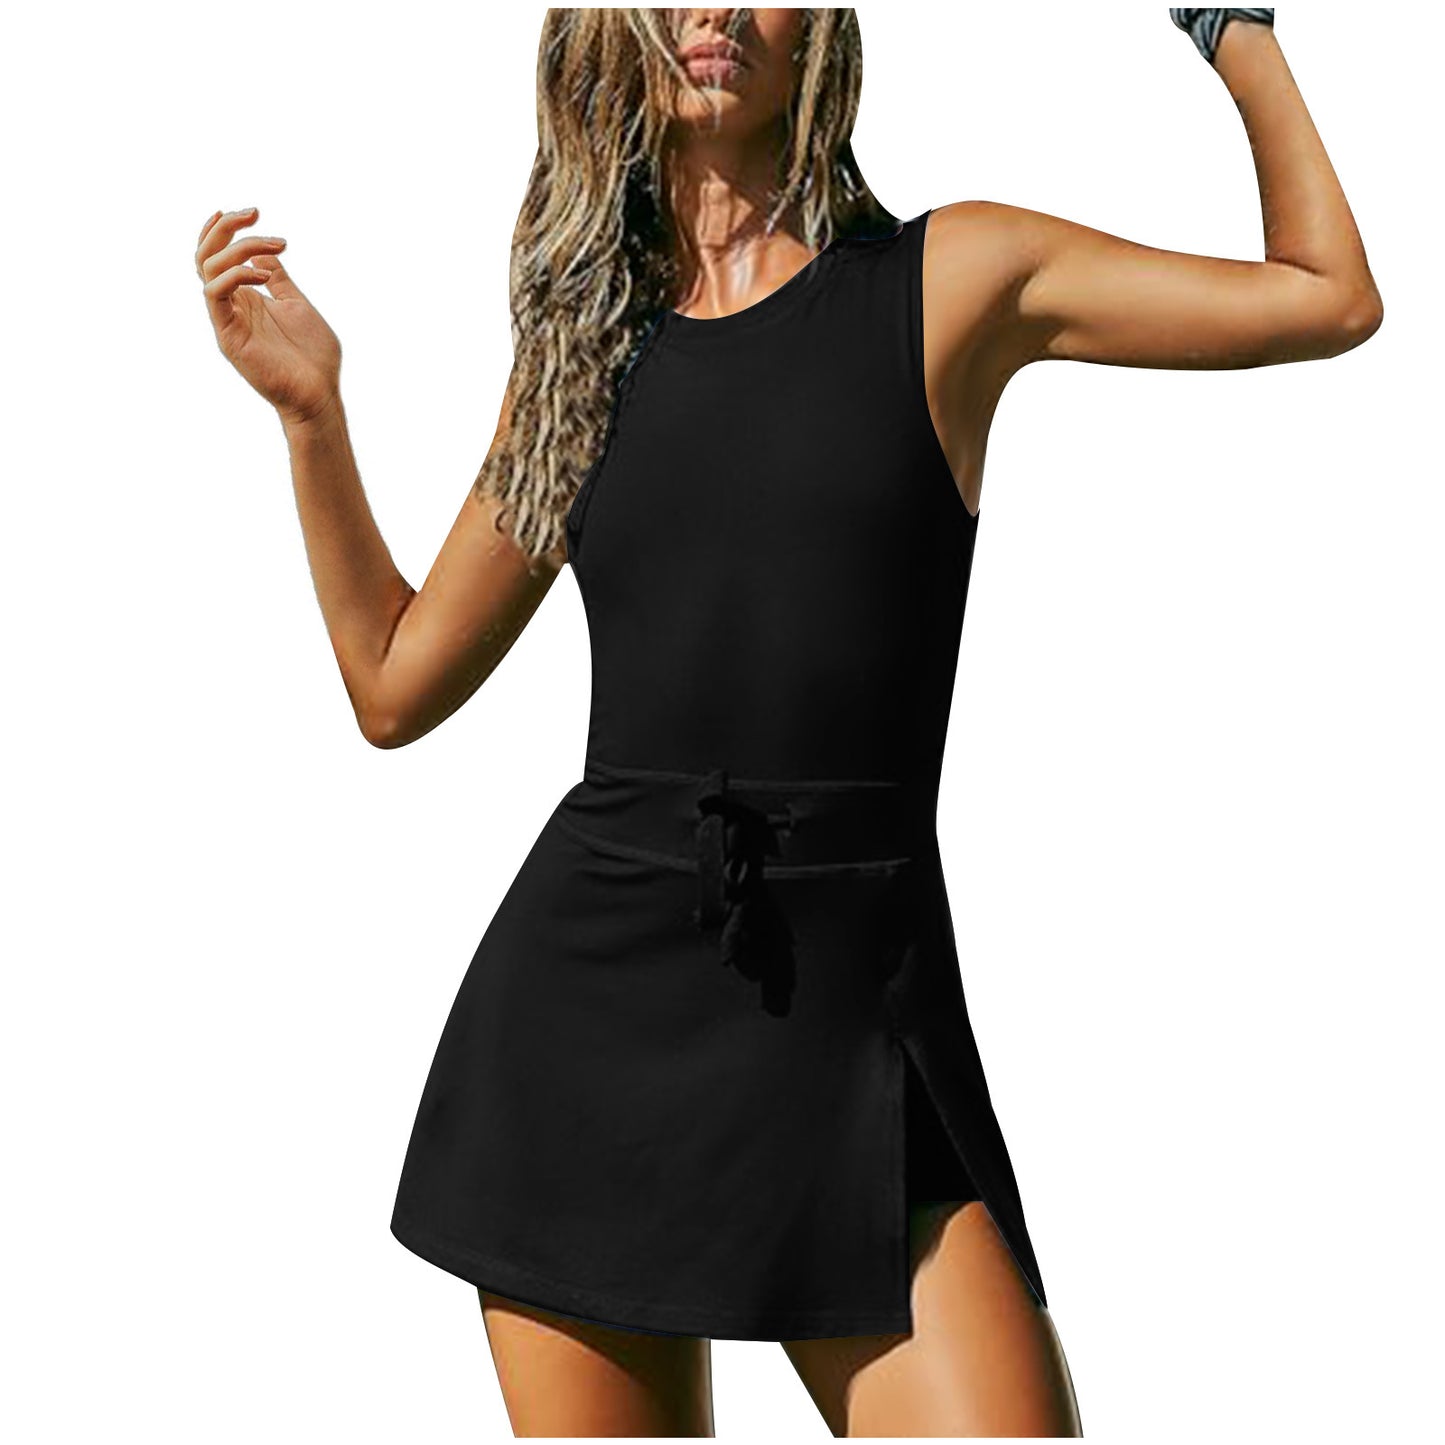 Fitness Jumpsuit with Built-in Shorts, Featuring Tennis Skirt Design